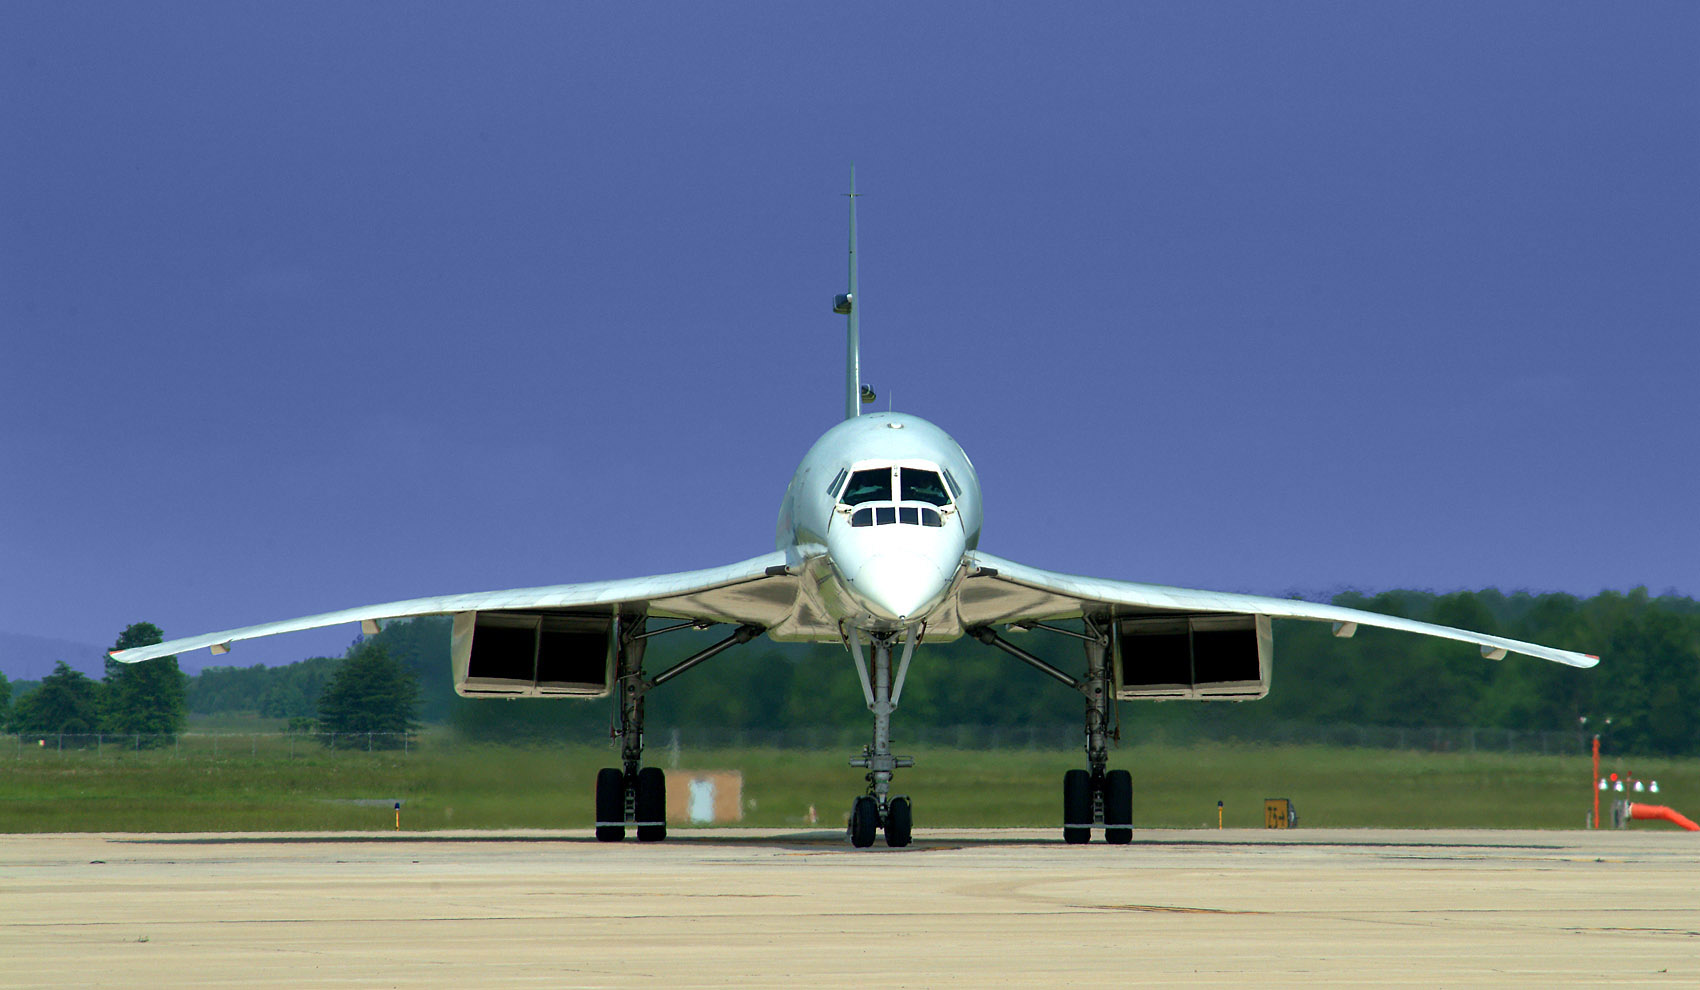 Concorde Ready To Takeof - Concorde Plane Front View - HD Wallpaper 